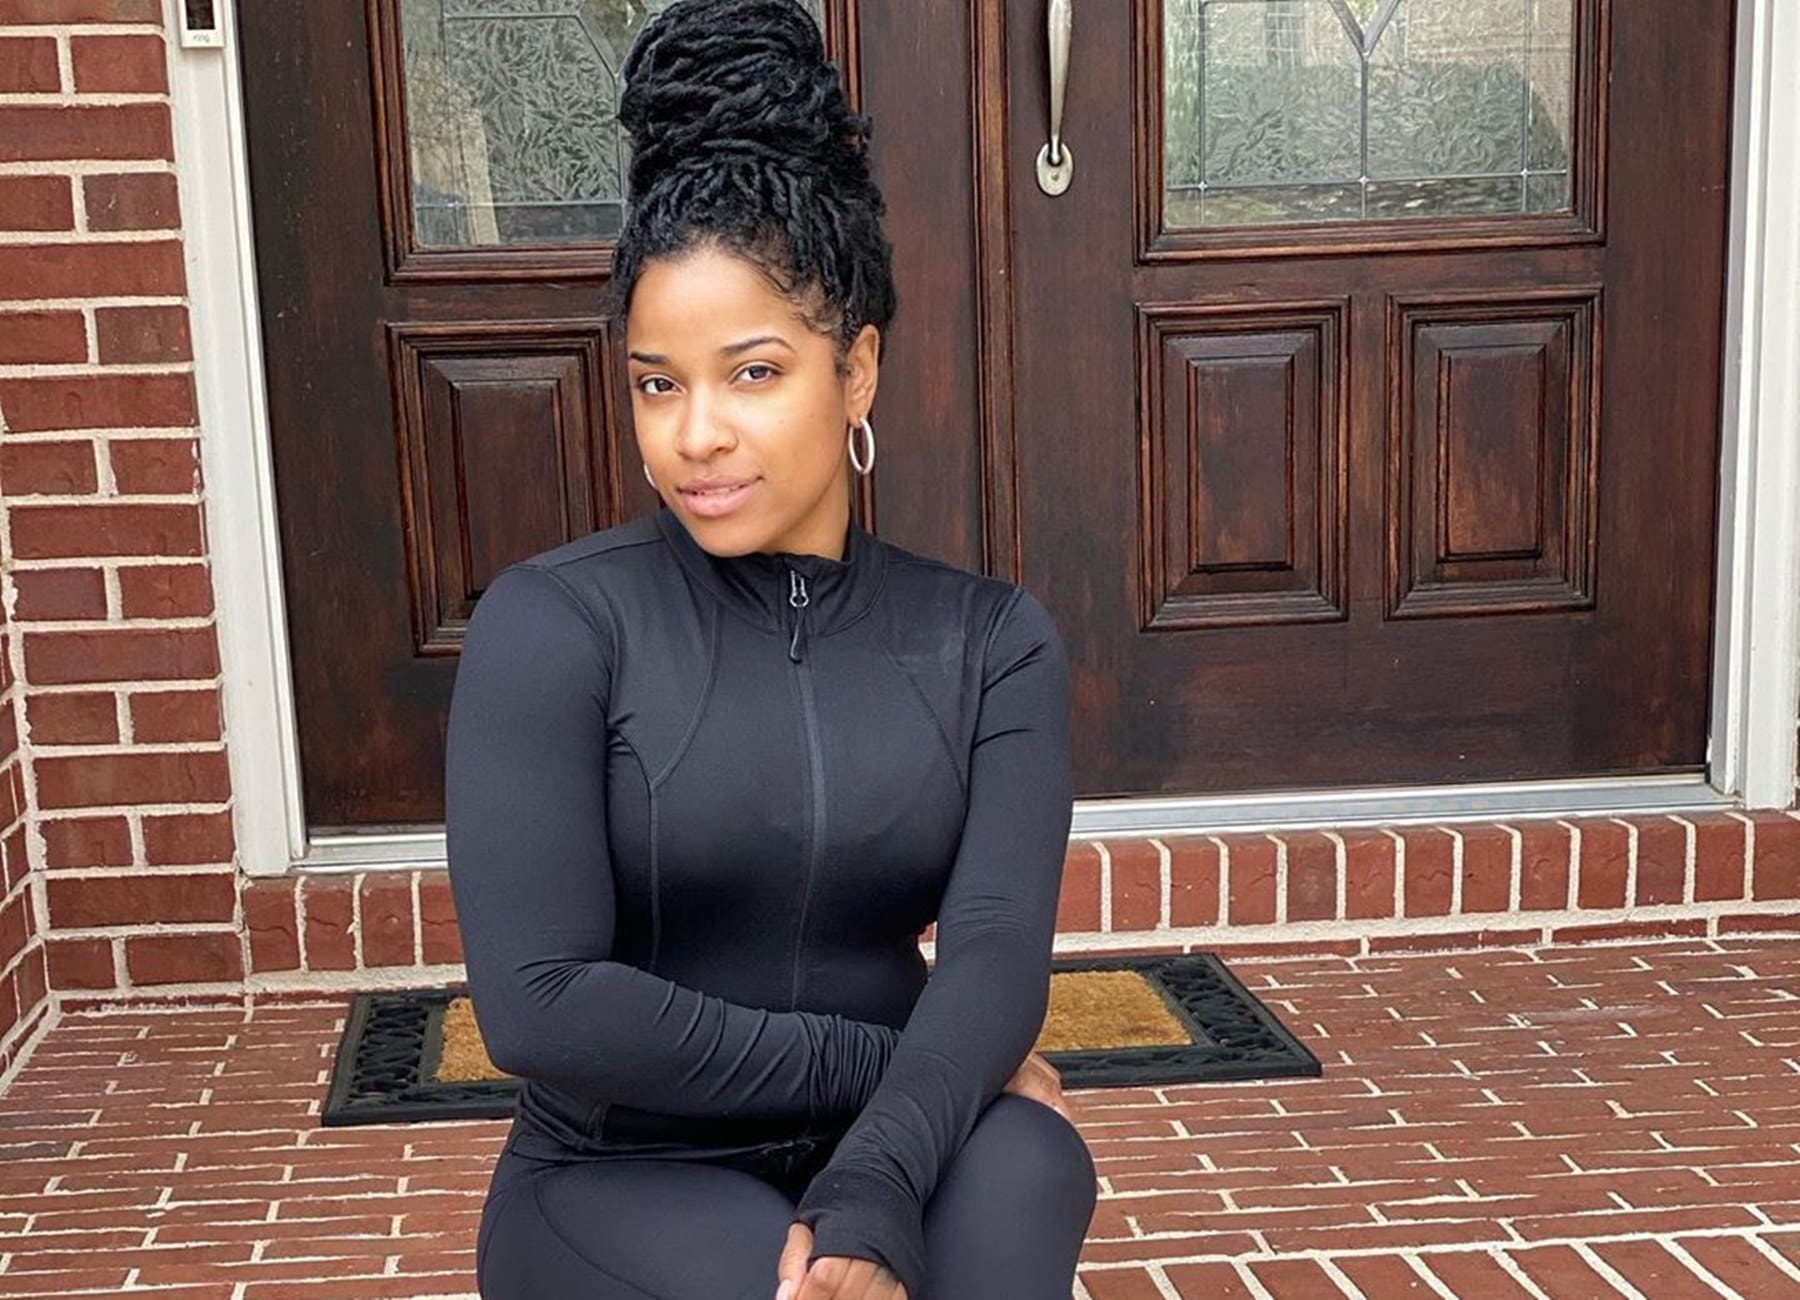 Toya Johnson Flaunts Her Natural Hair - Check Out The Video